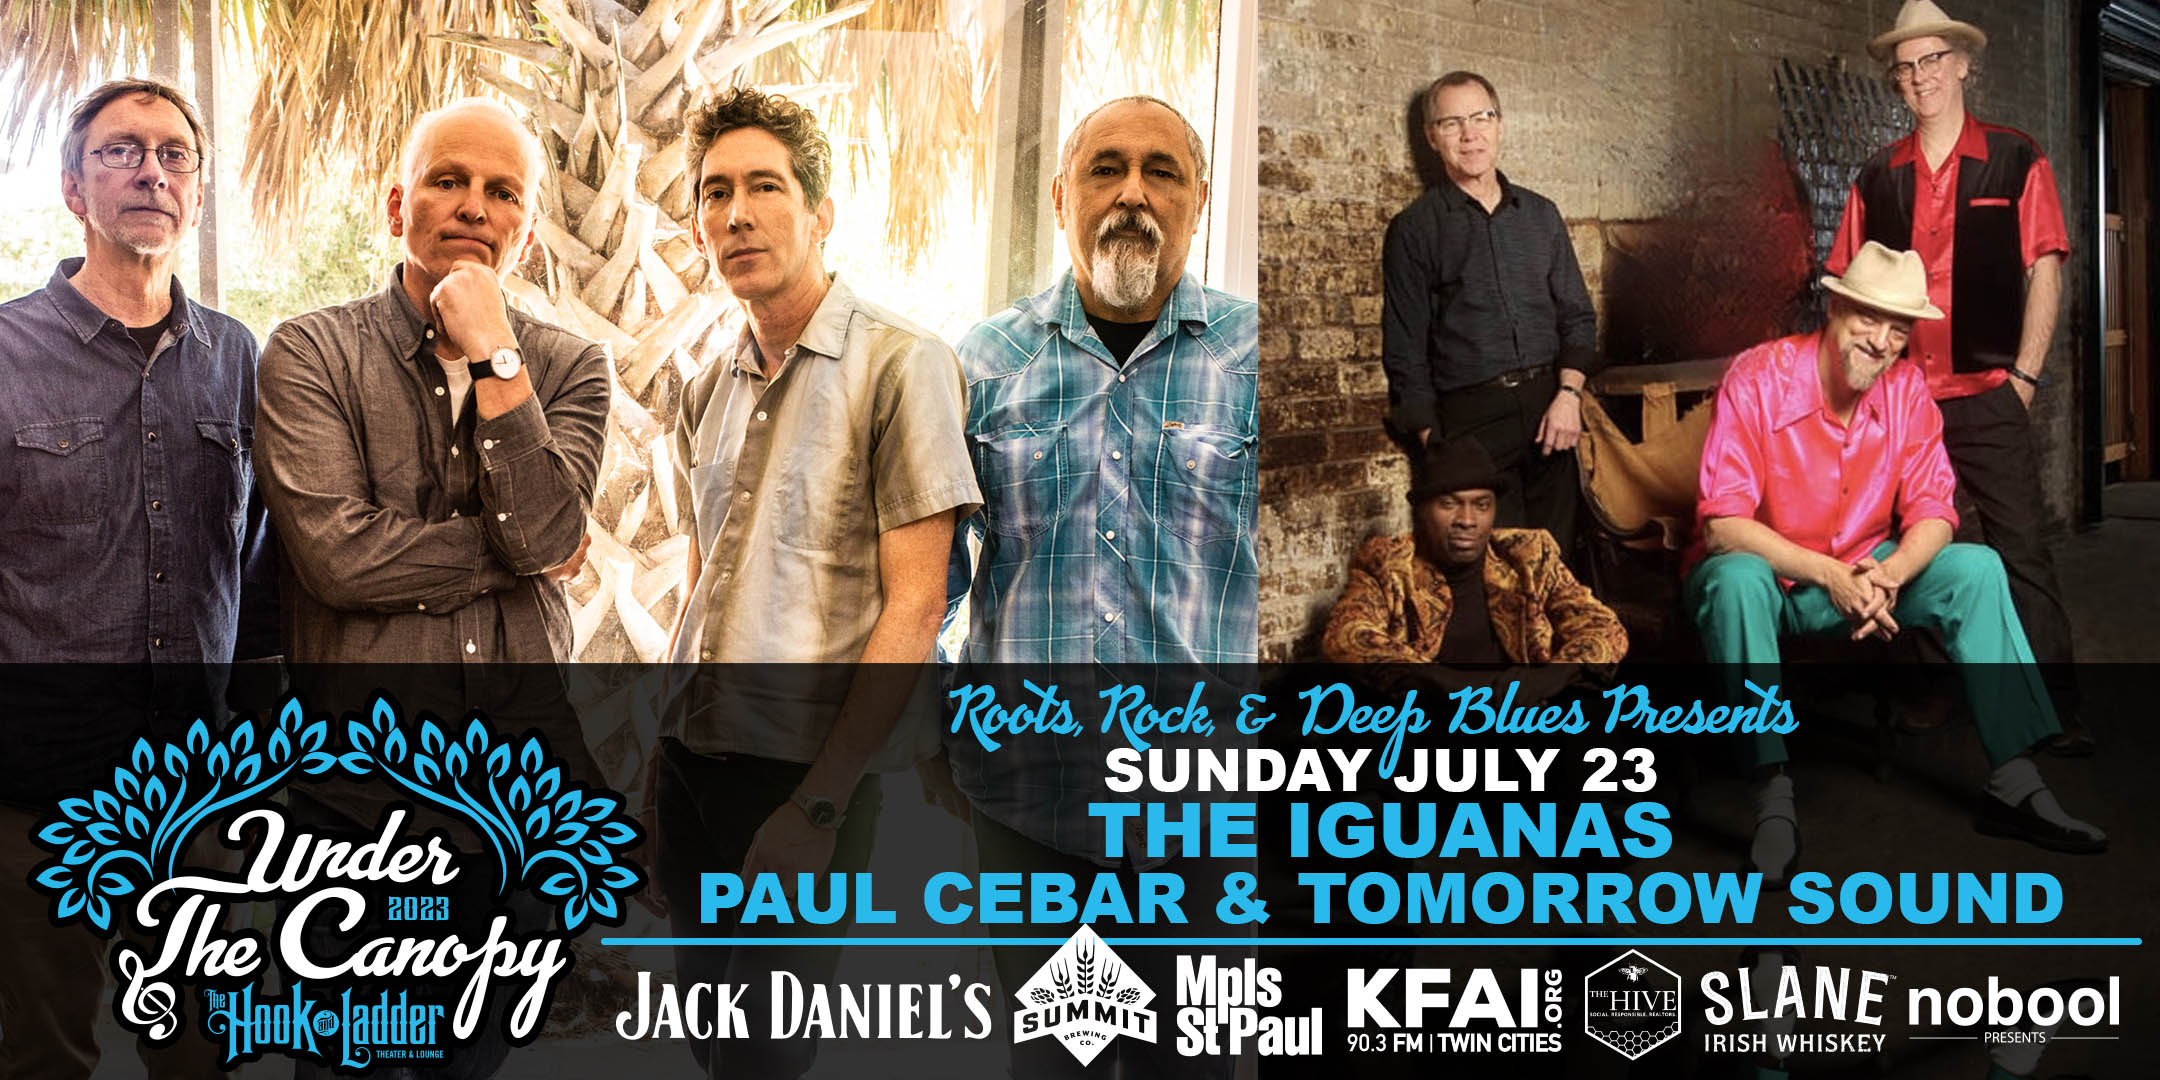 The Iguanas / Paul Cebar Tomorrow Sound Sunday July 23, 2023 Under Thxe Canopy at The Hook and Ladder Theater "An Urban Outdoor Summer Concert Series" Doors 6:00pm :: Music 7:00pm :: 21+ Reserved Seats: $35 GA: $20 ADV / $30 DOS * Does Not Include Fees